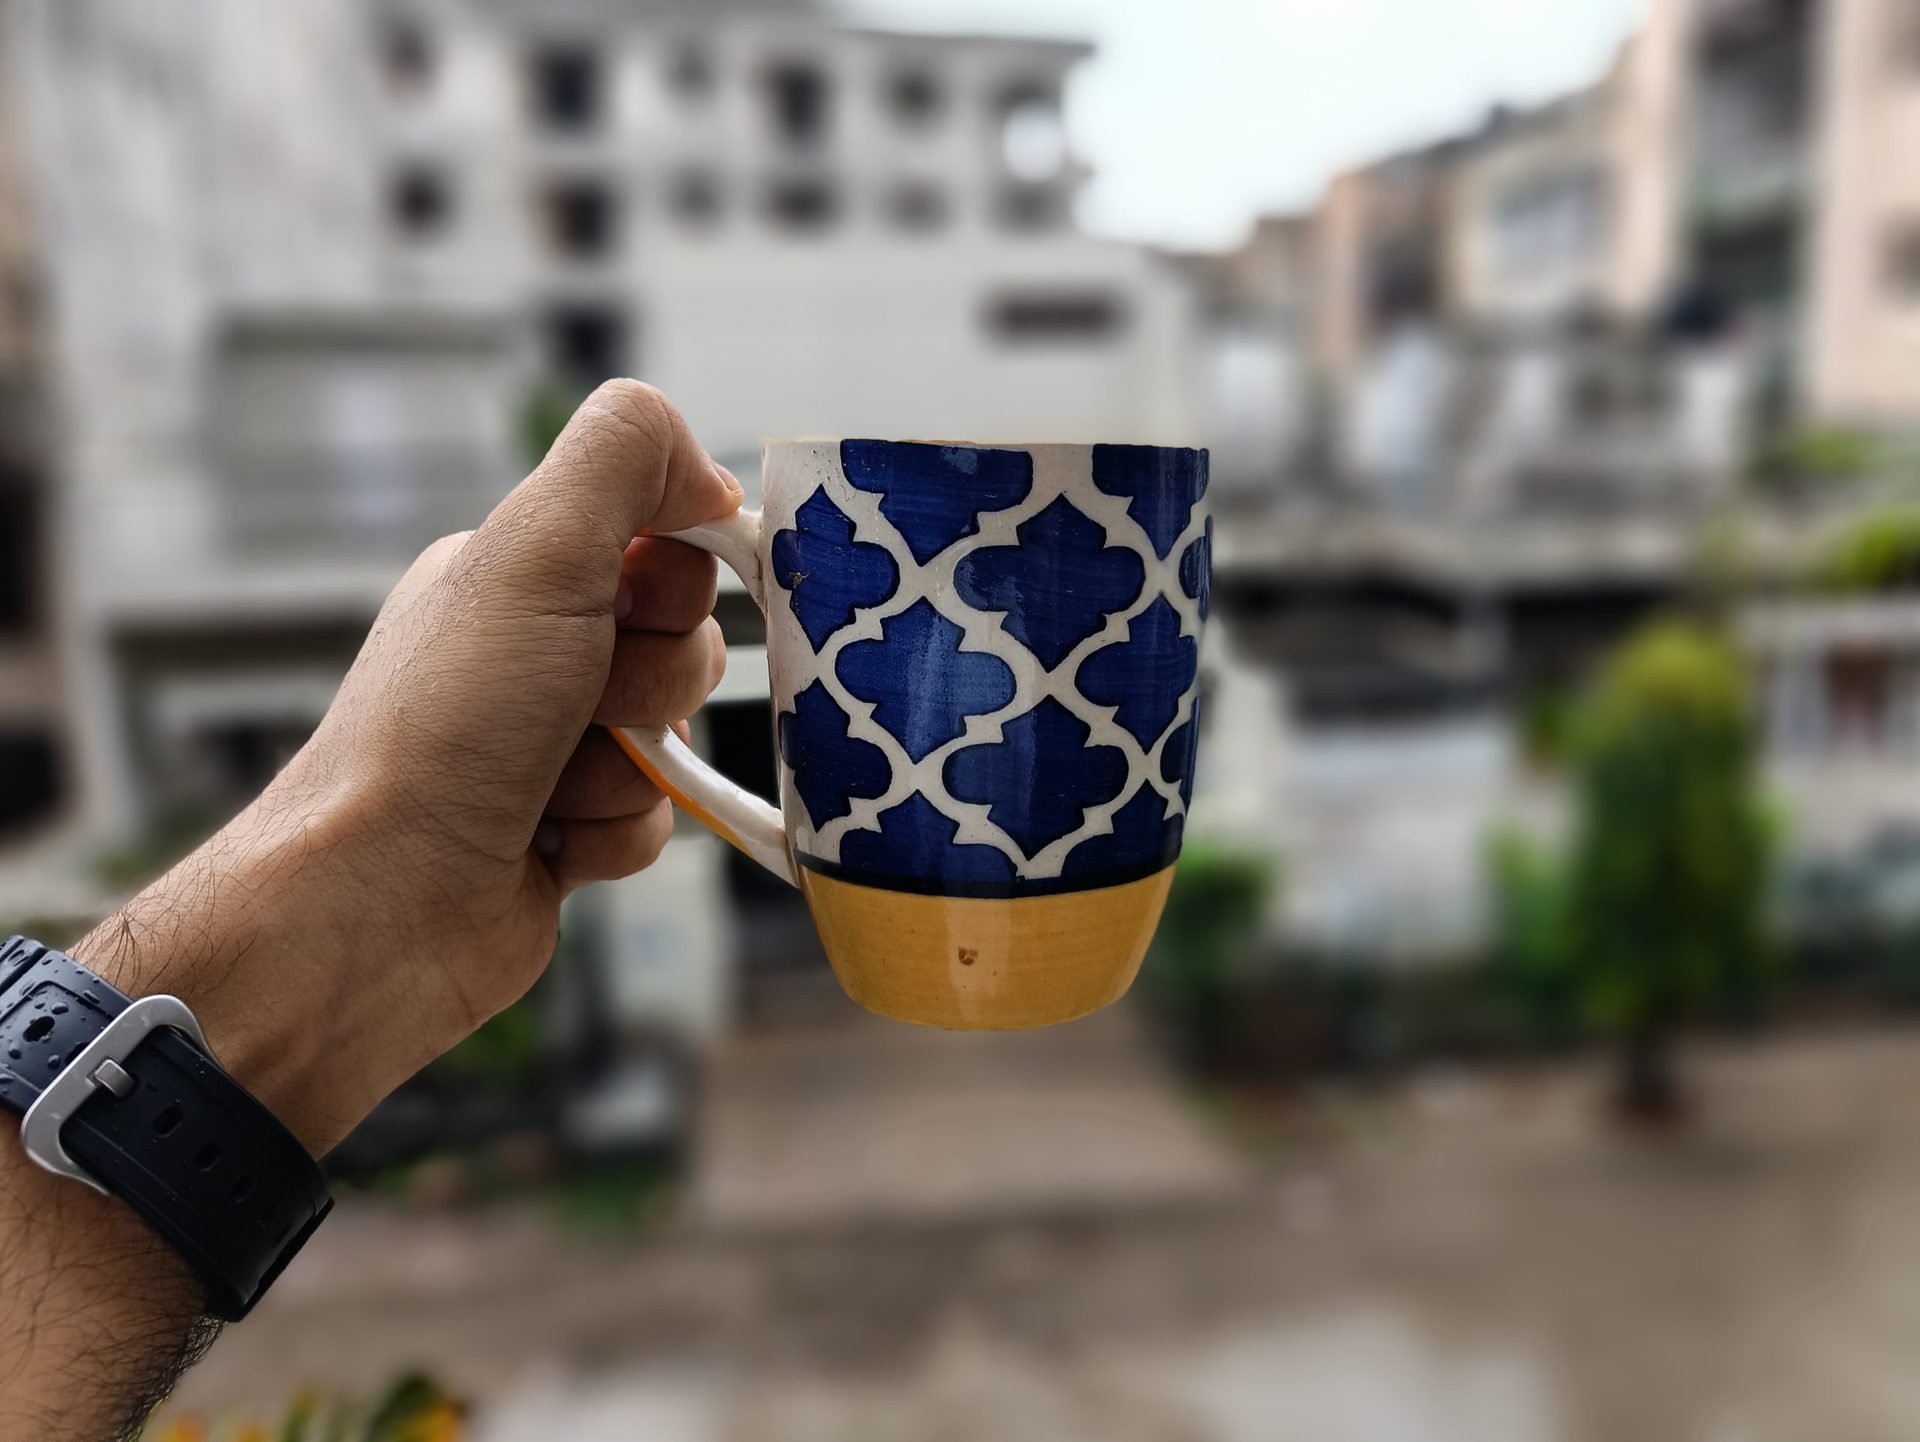 Poco F3 GT portrait mode from rear camera of hand holding a colorful blue, white, and yellow mug in front of a window.